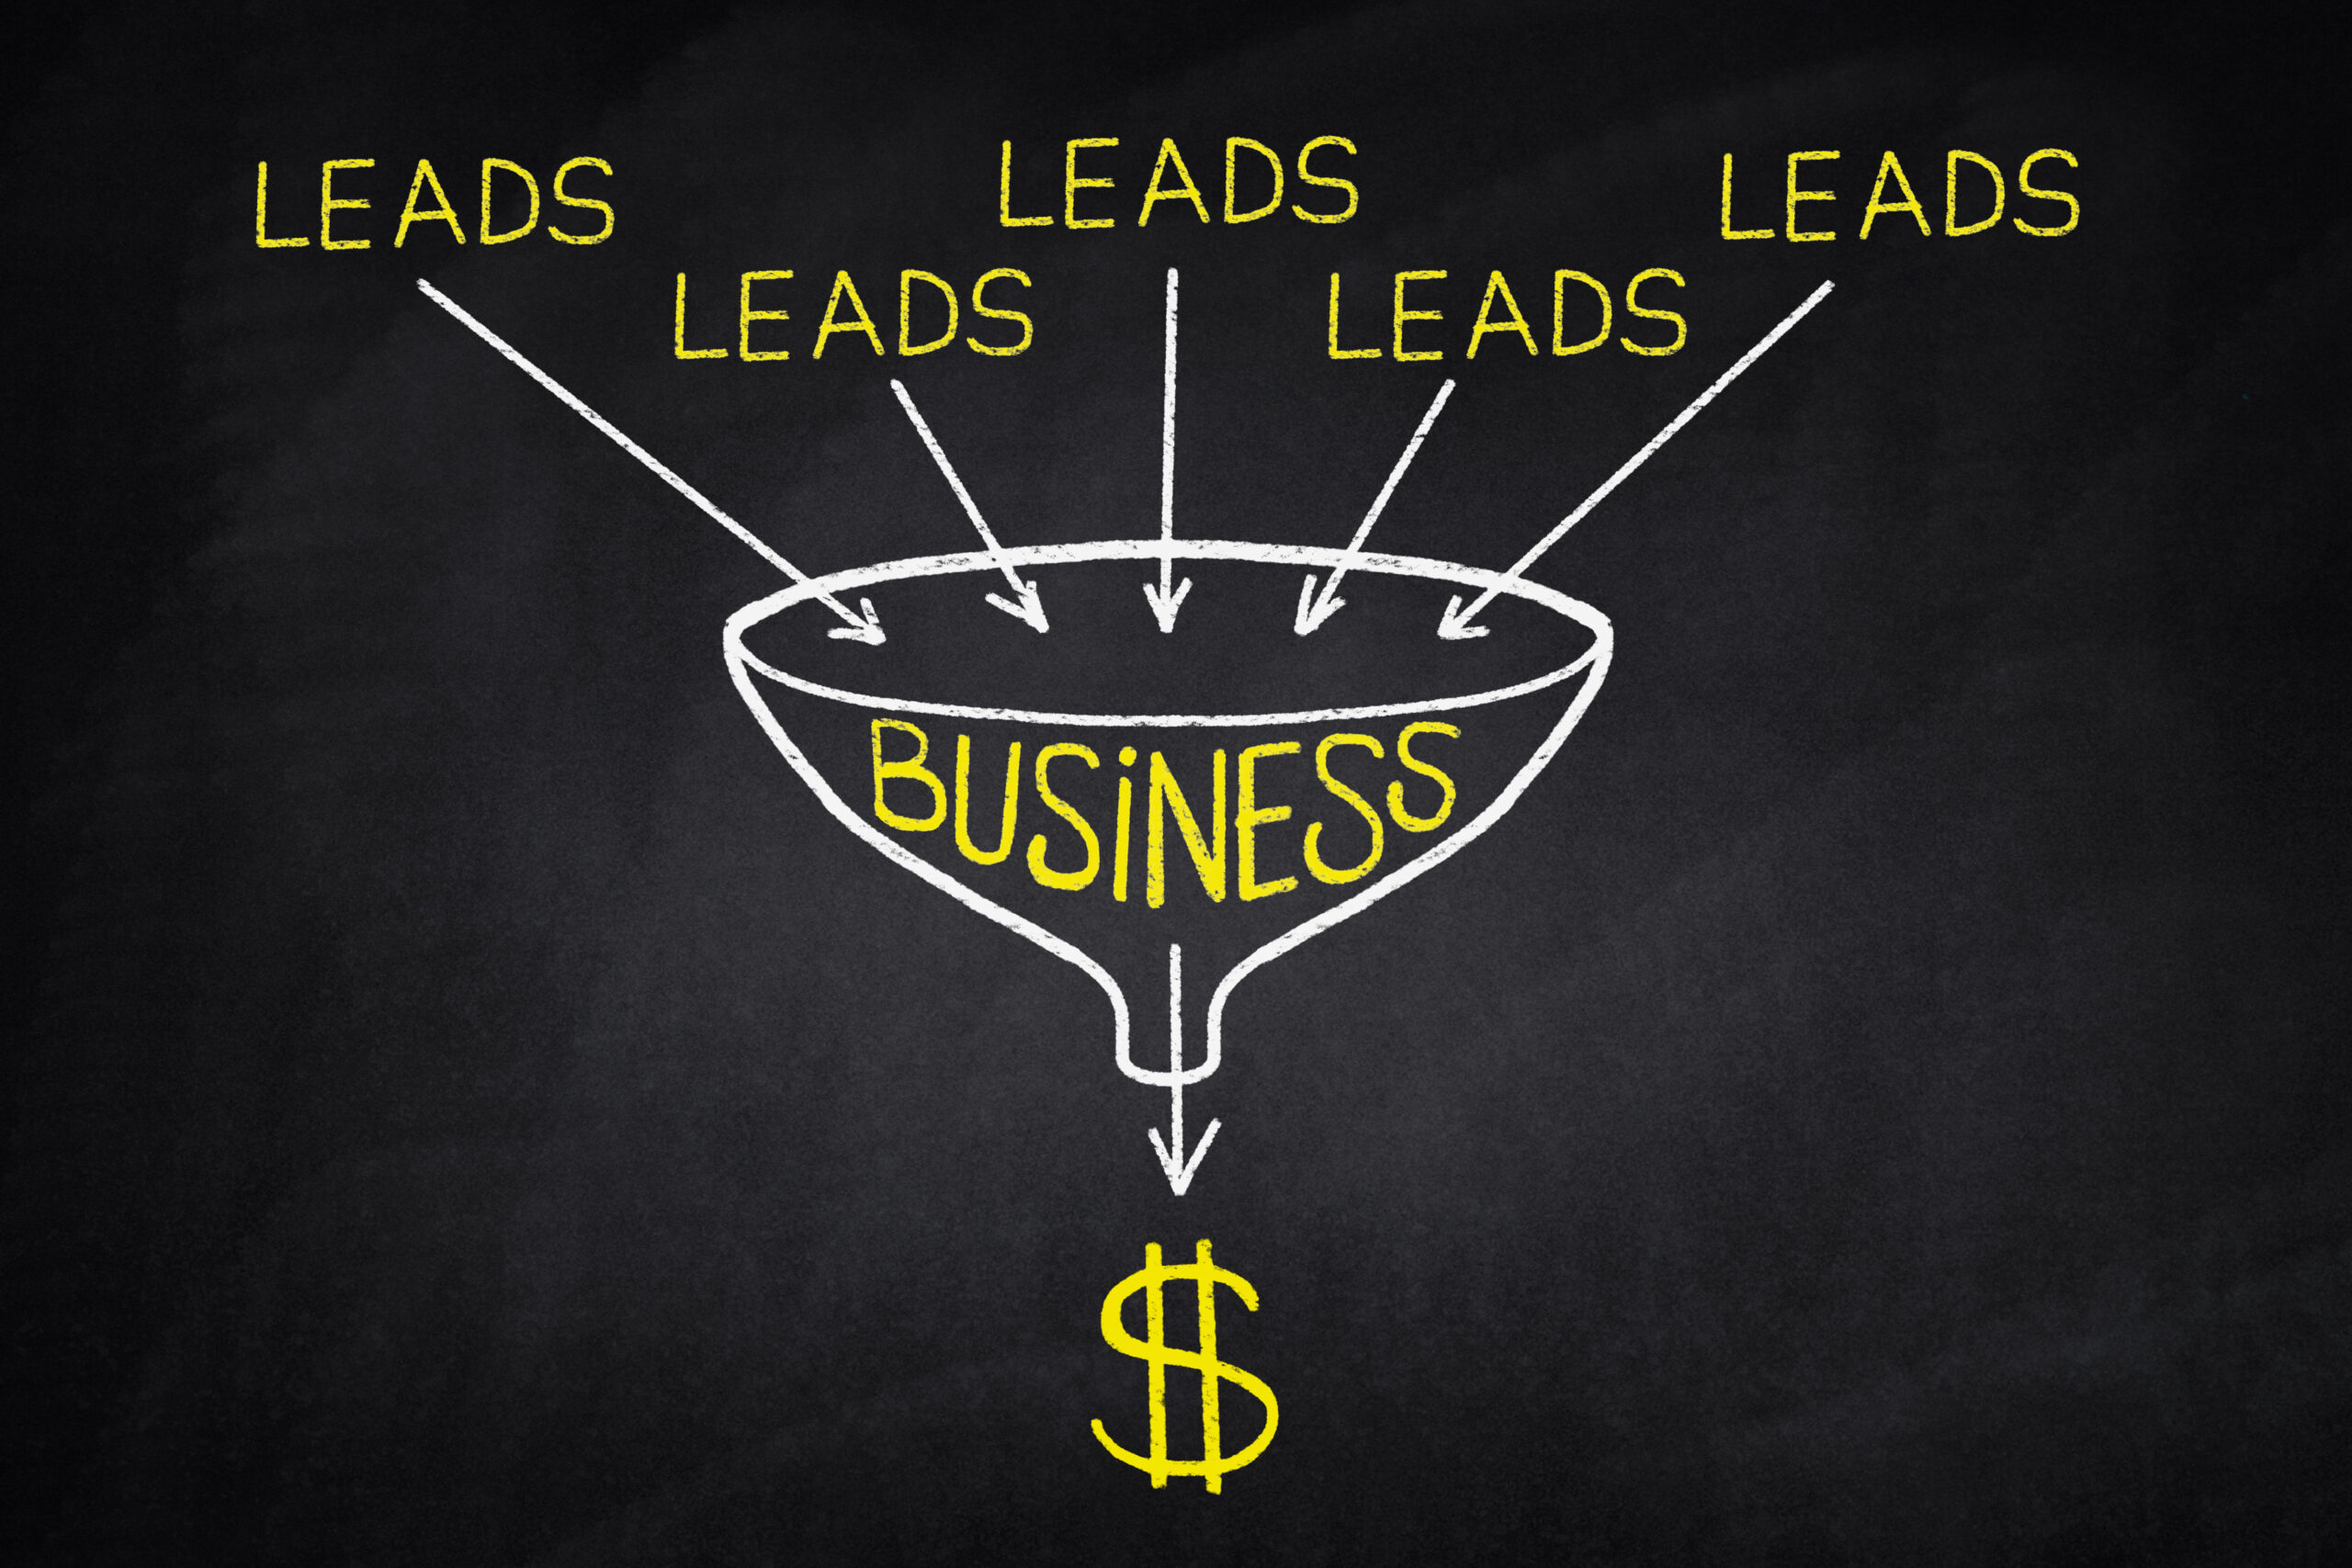 5 Secrets to Successful Lead Generation: From Social Media to Email Marketing